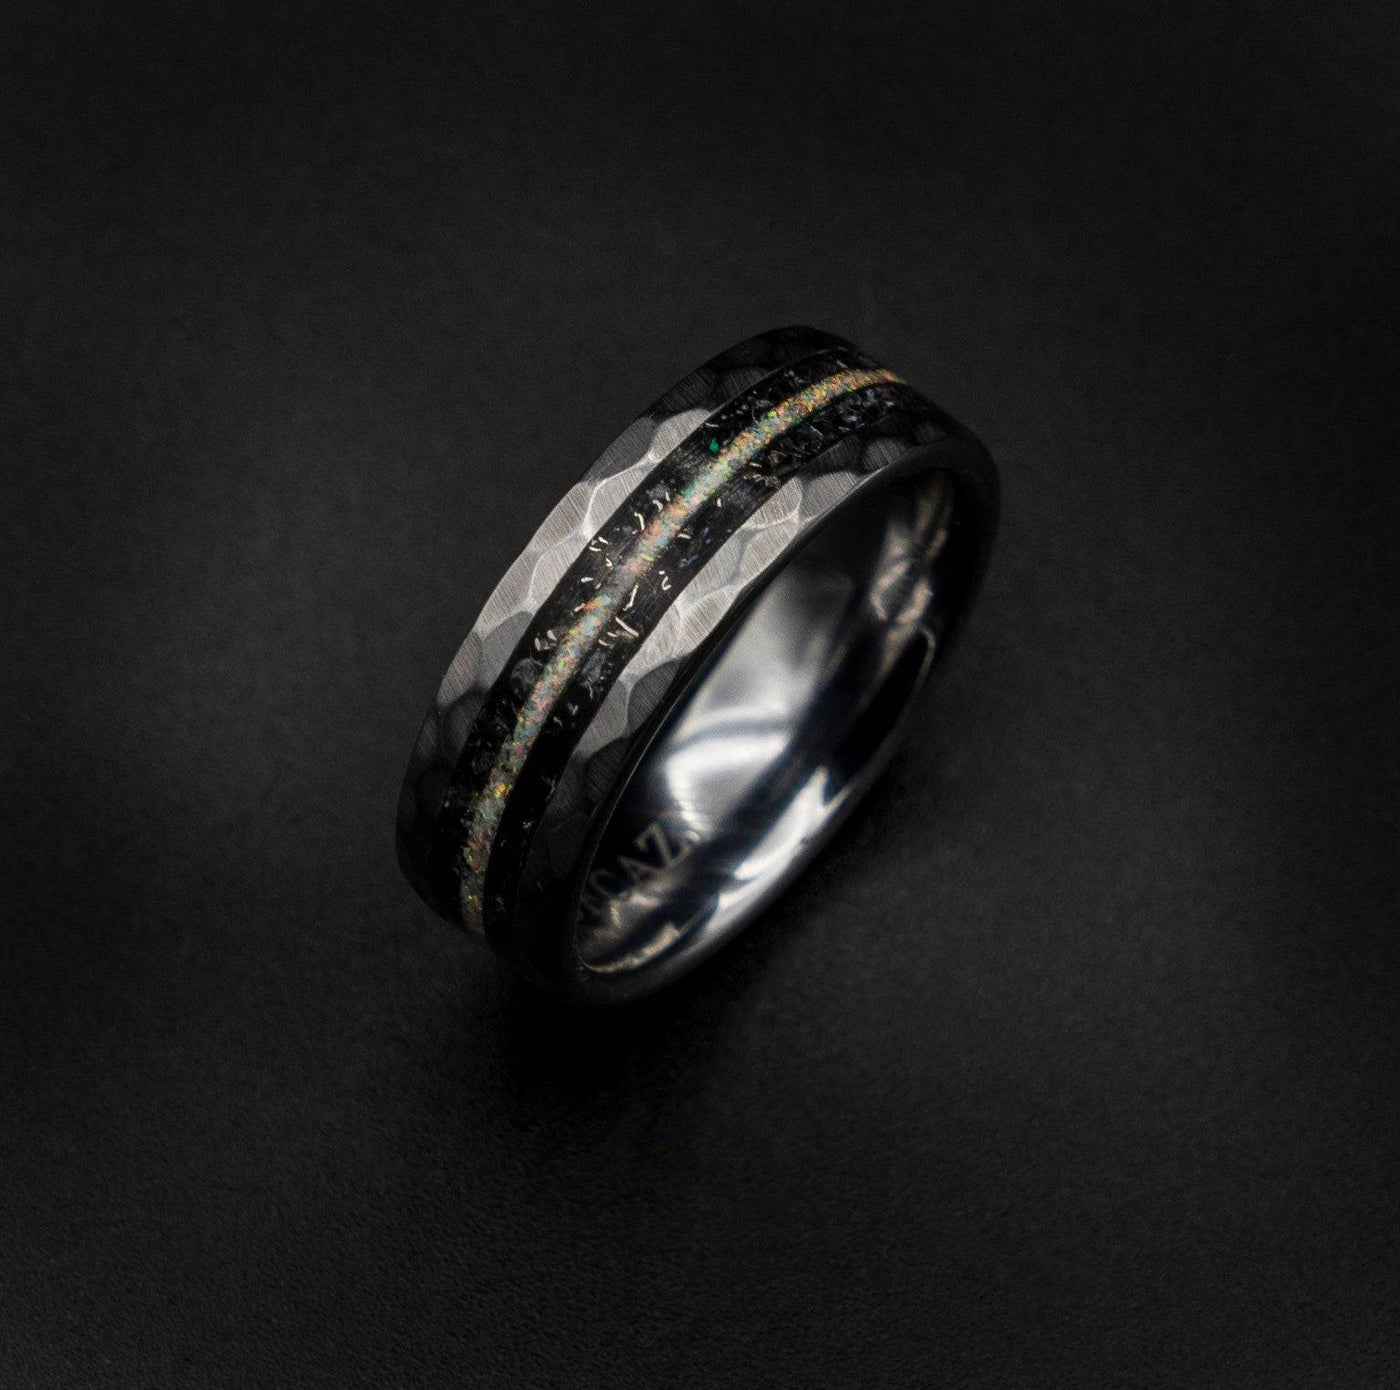 Hammered Ring with Meteorite & Moonstone Inlay